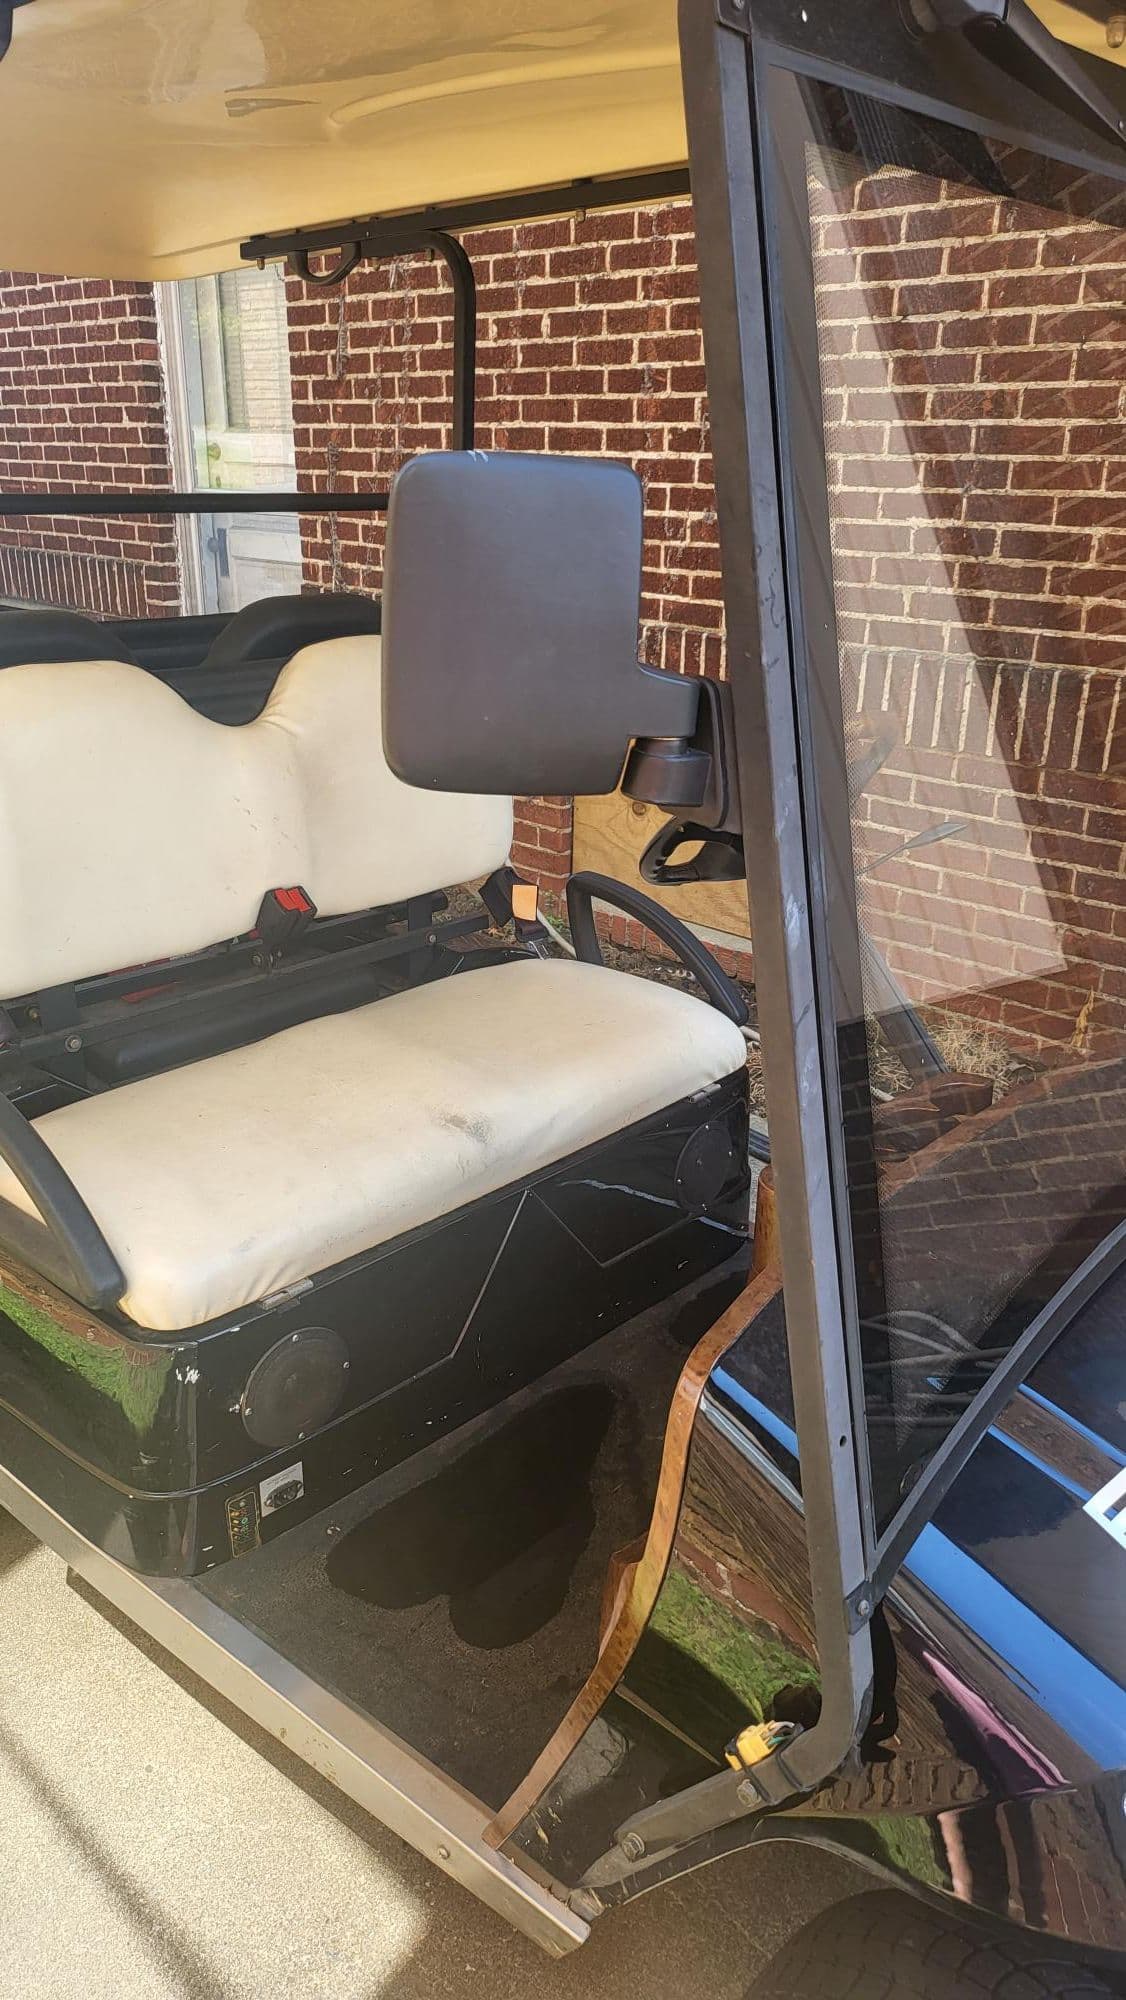 2009 Porsche 911 - 2009 Zone Electric Golf Cart price for quick sale - Used - Portsmouth, OH 45662, United States